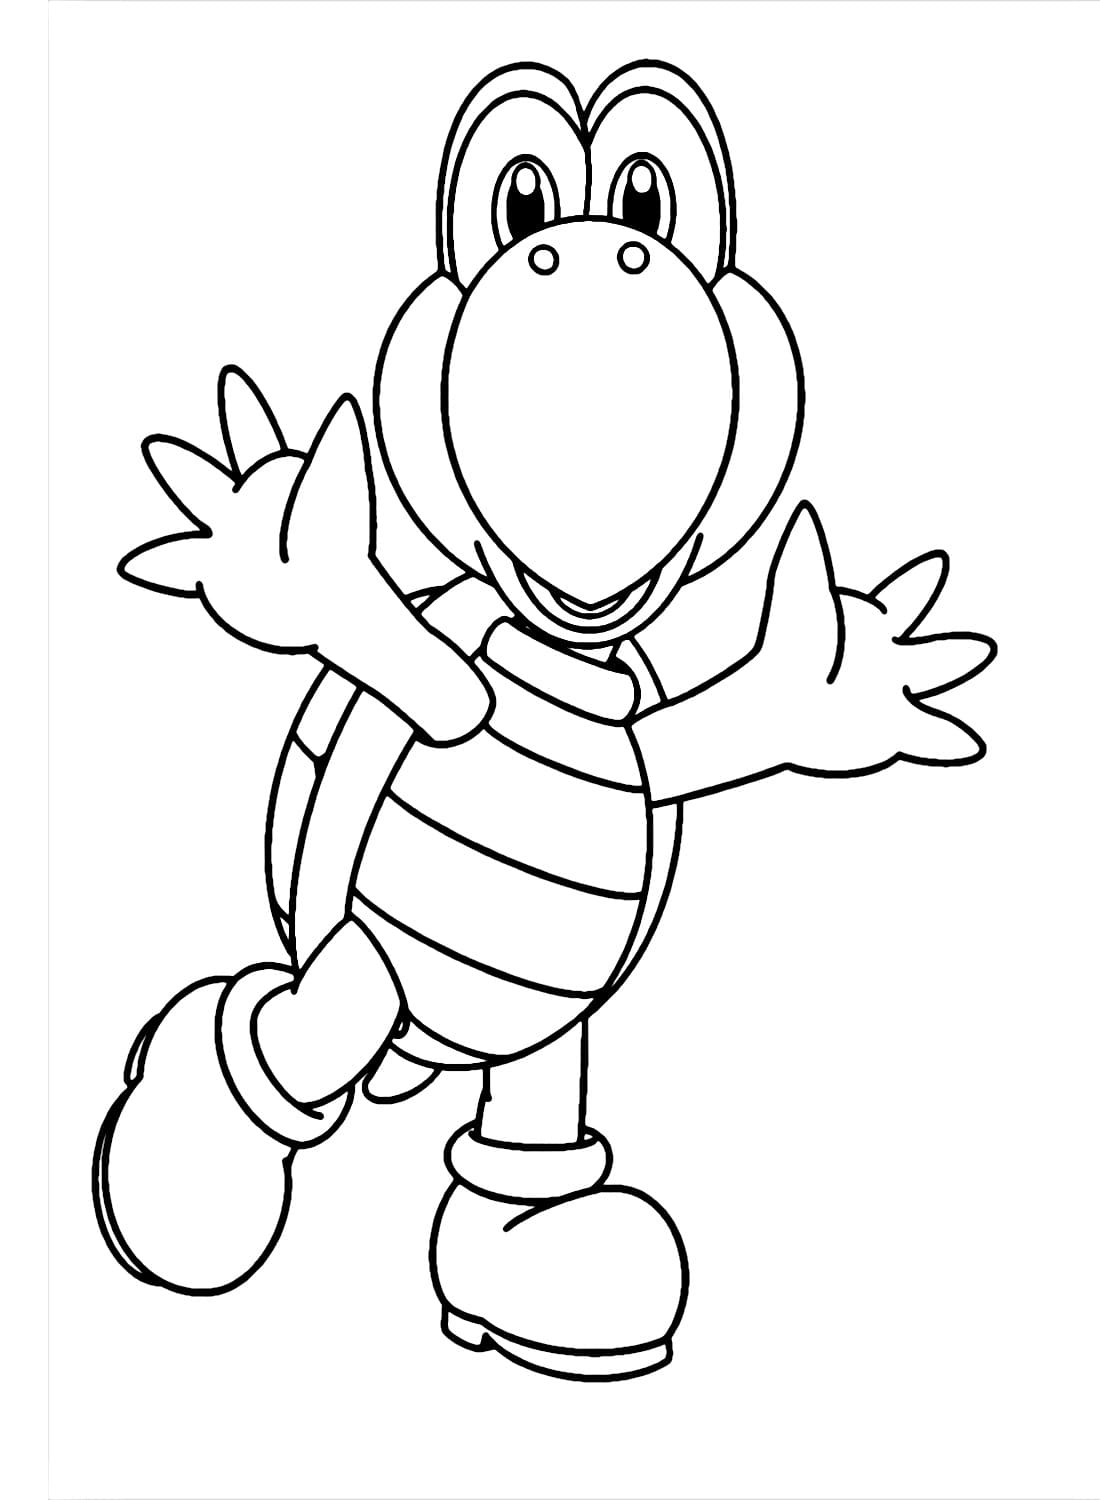 Koopa Troopa Amical coloring page